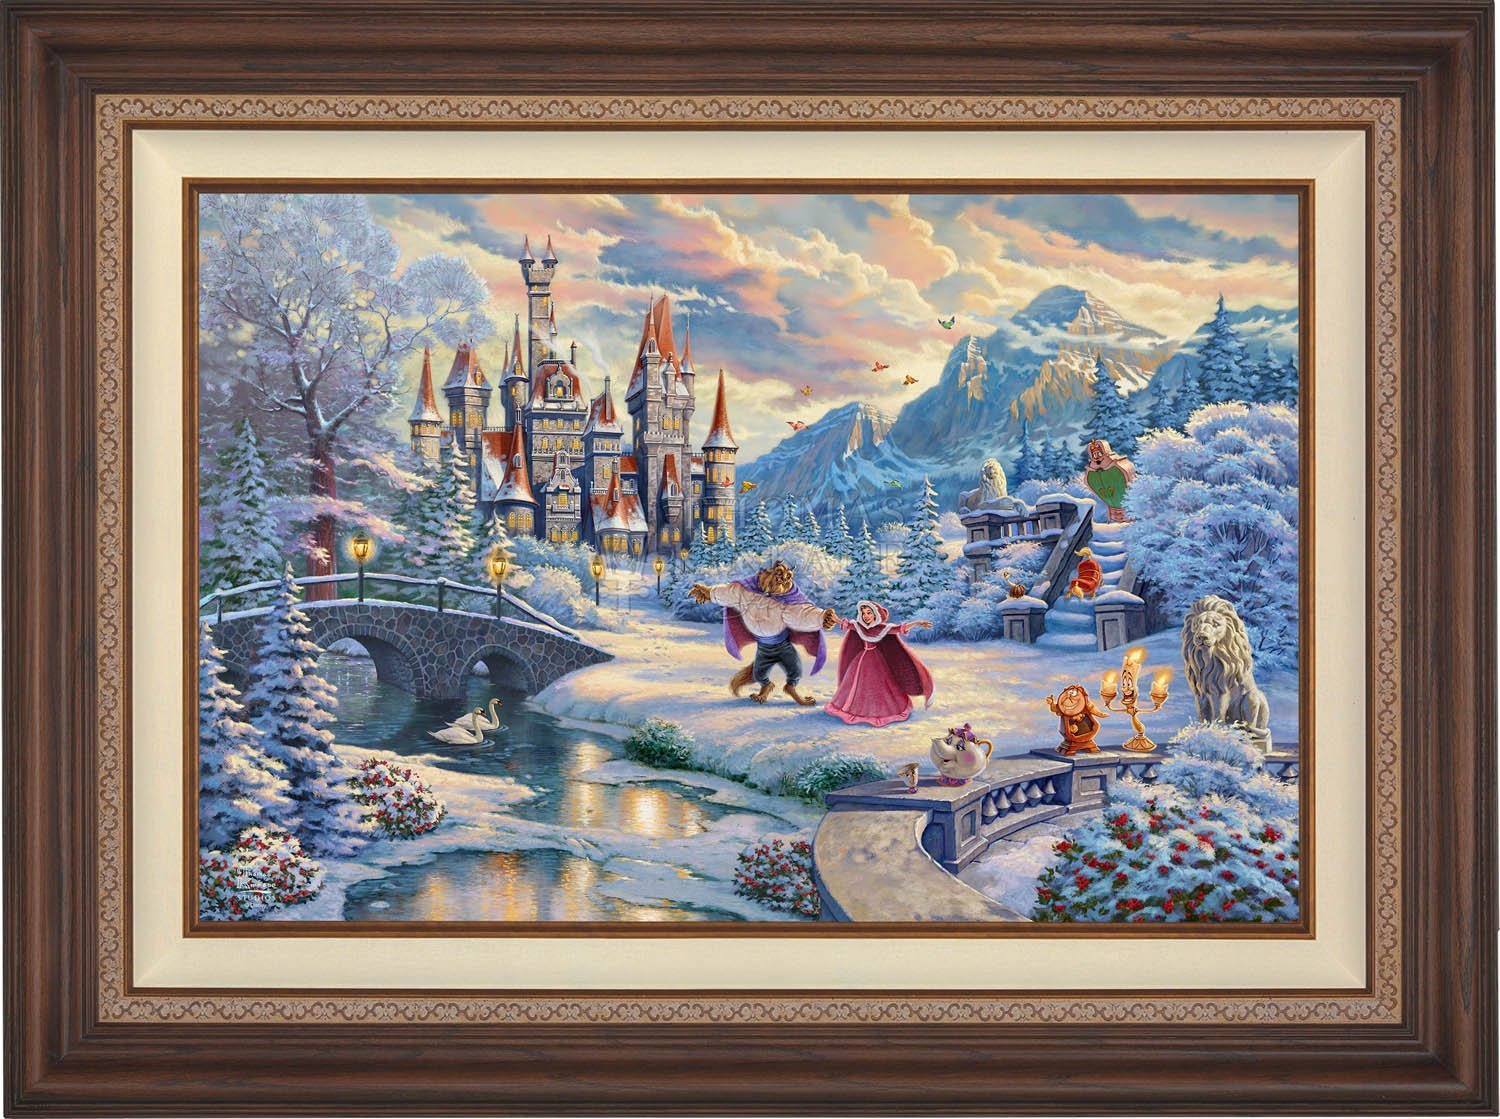  Beauty and the Beast's Winter Enchantment - Walnut Frame